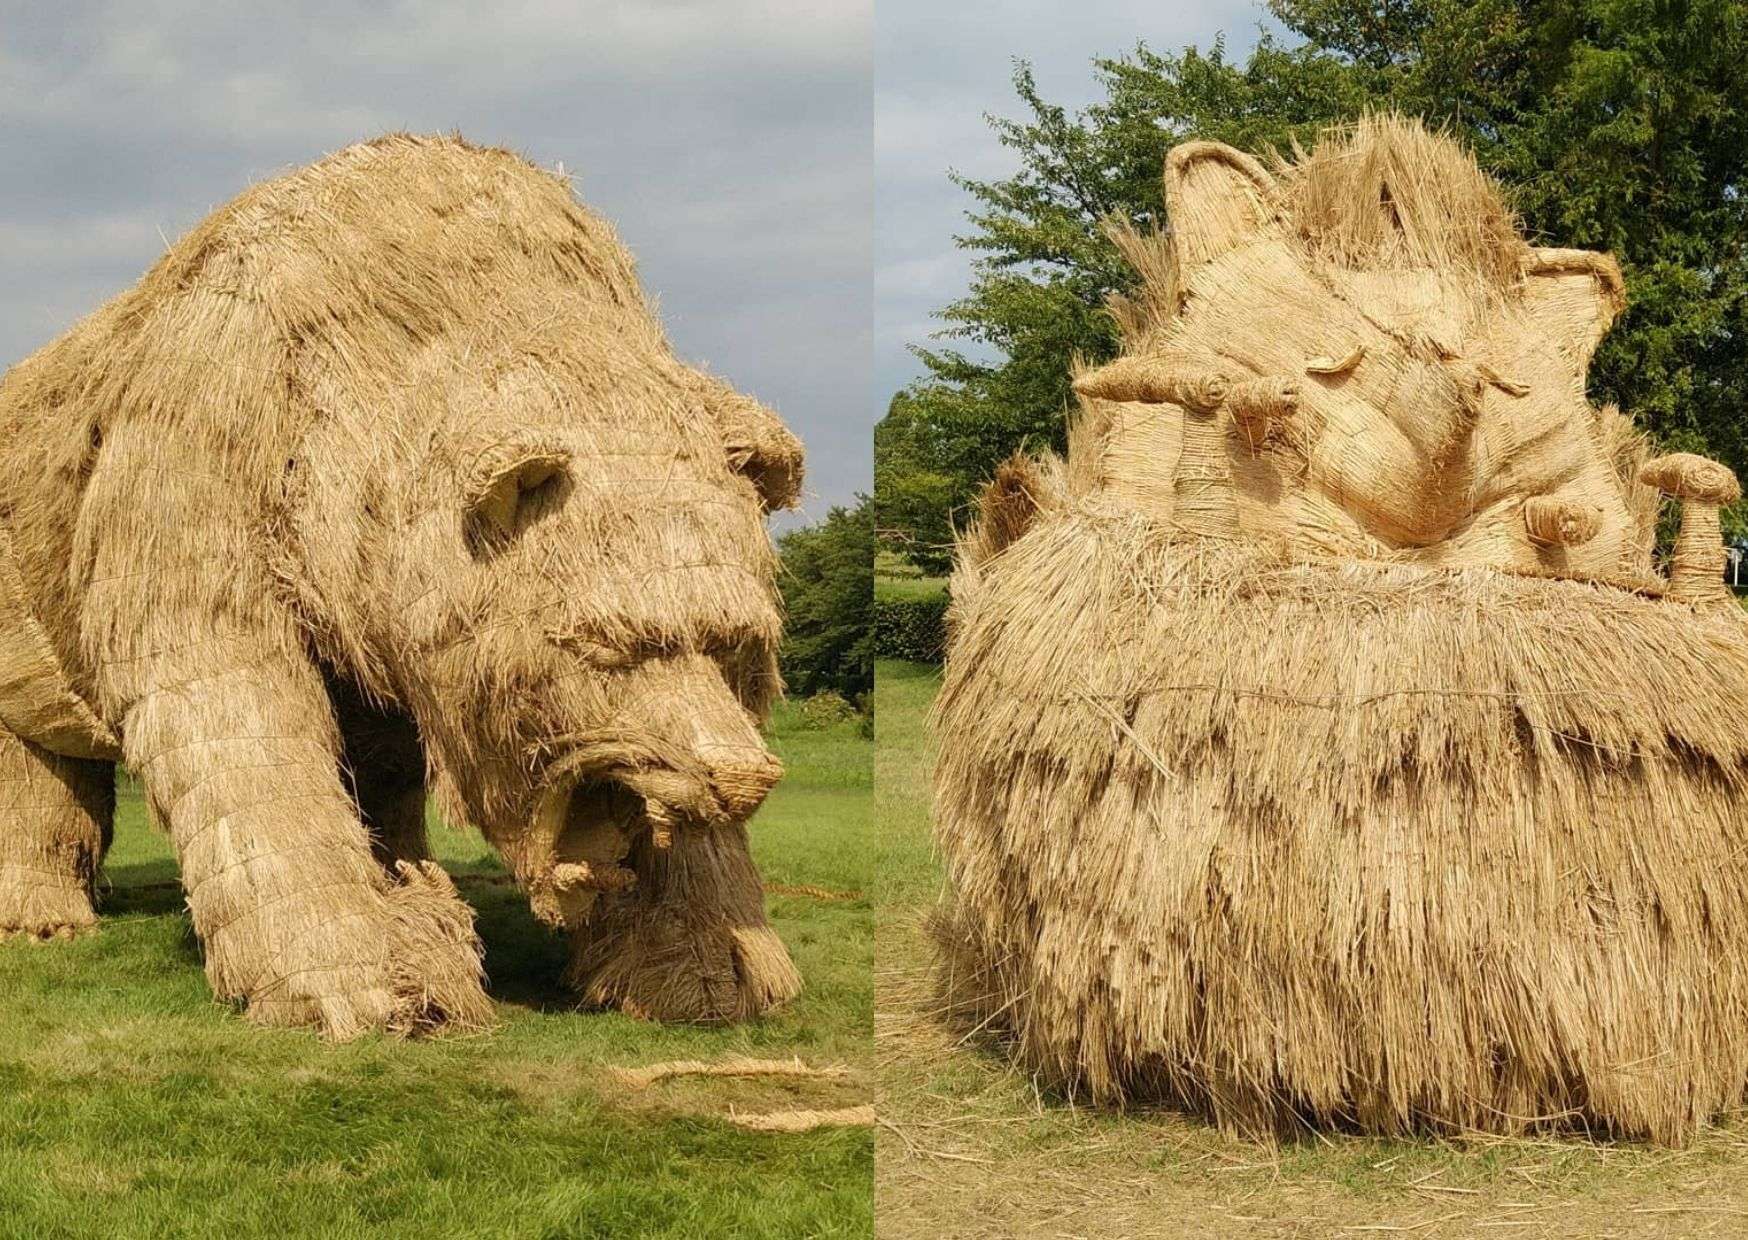 Amazing Giant Straw Sculptures At The Wara Art Festival In Japan